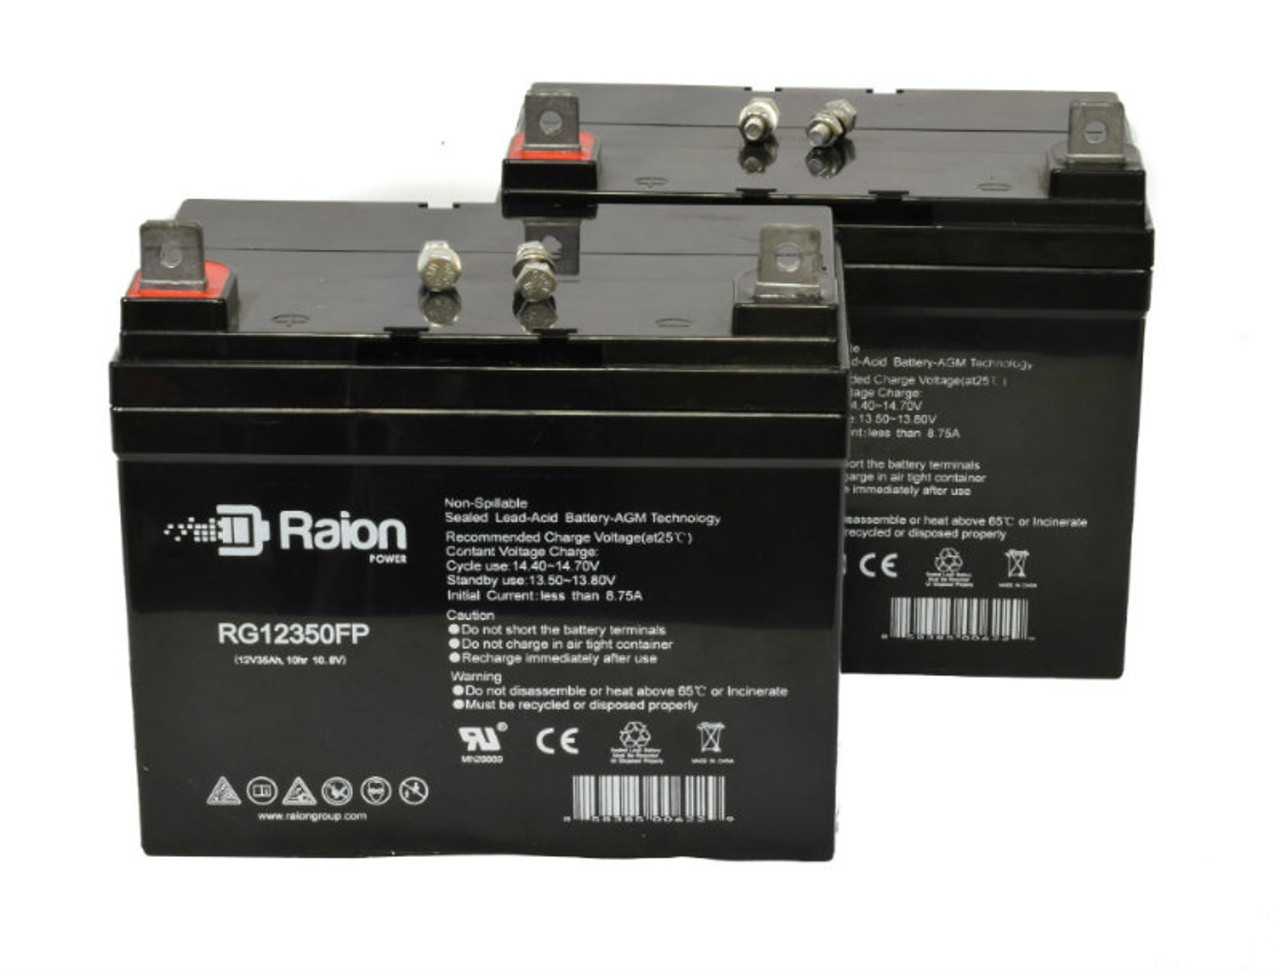 Raion Power Replacement 12V 35Ah Lawn Mower Battery for Ingersol Equipment 808 - 2 Pack